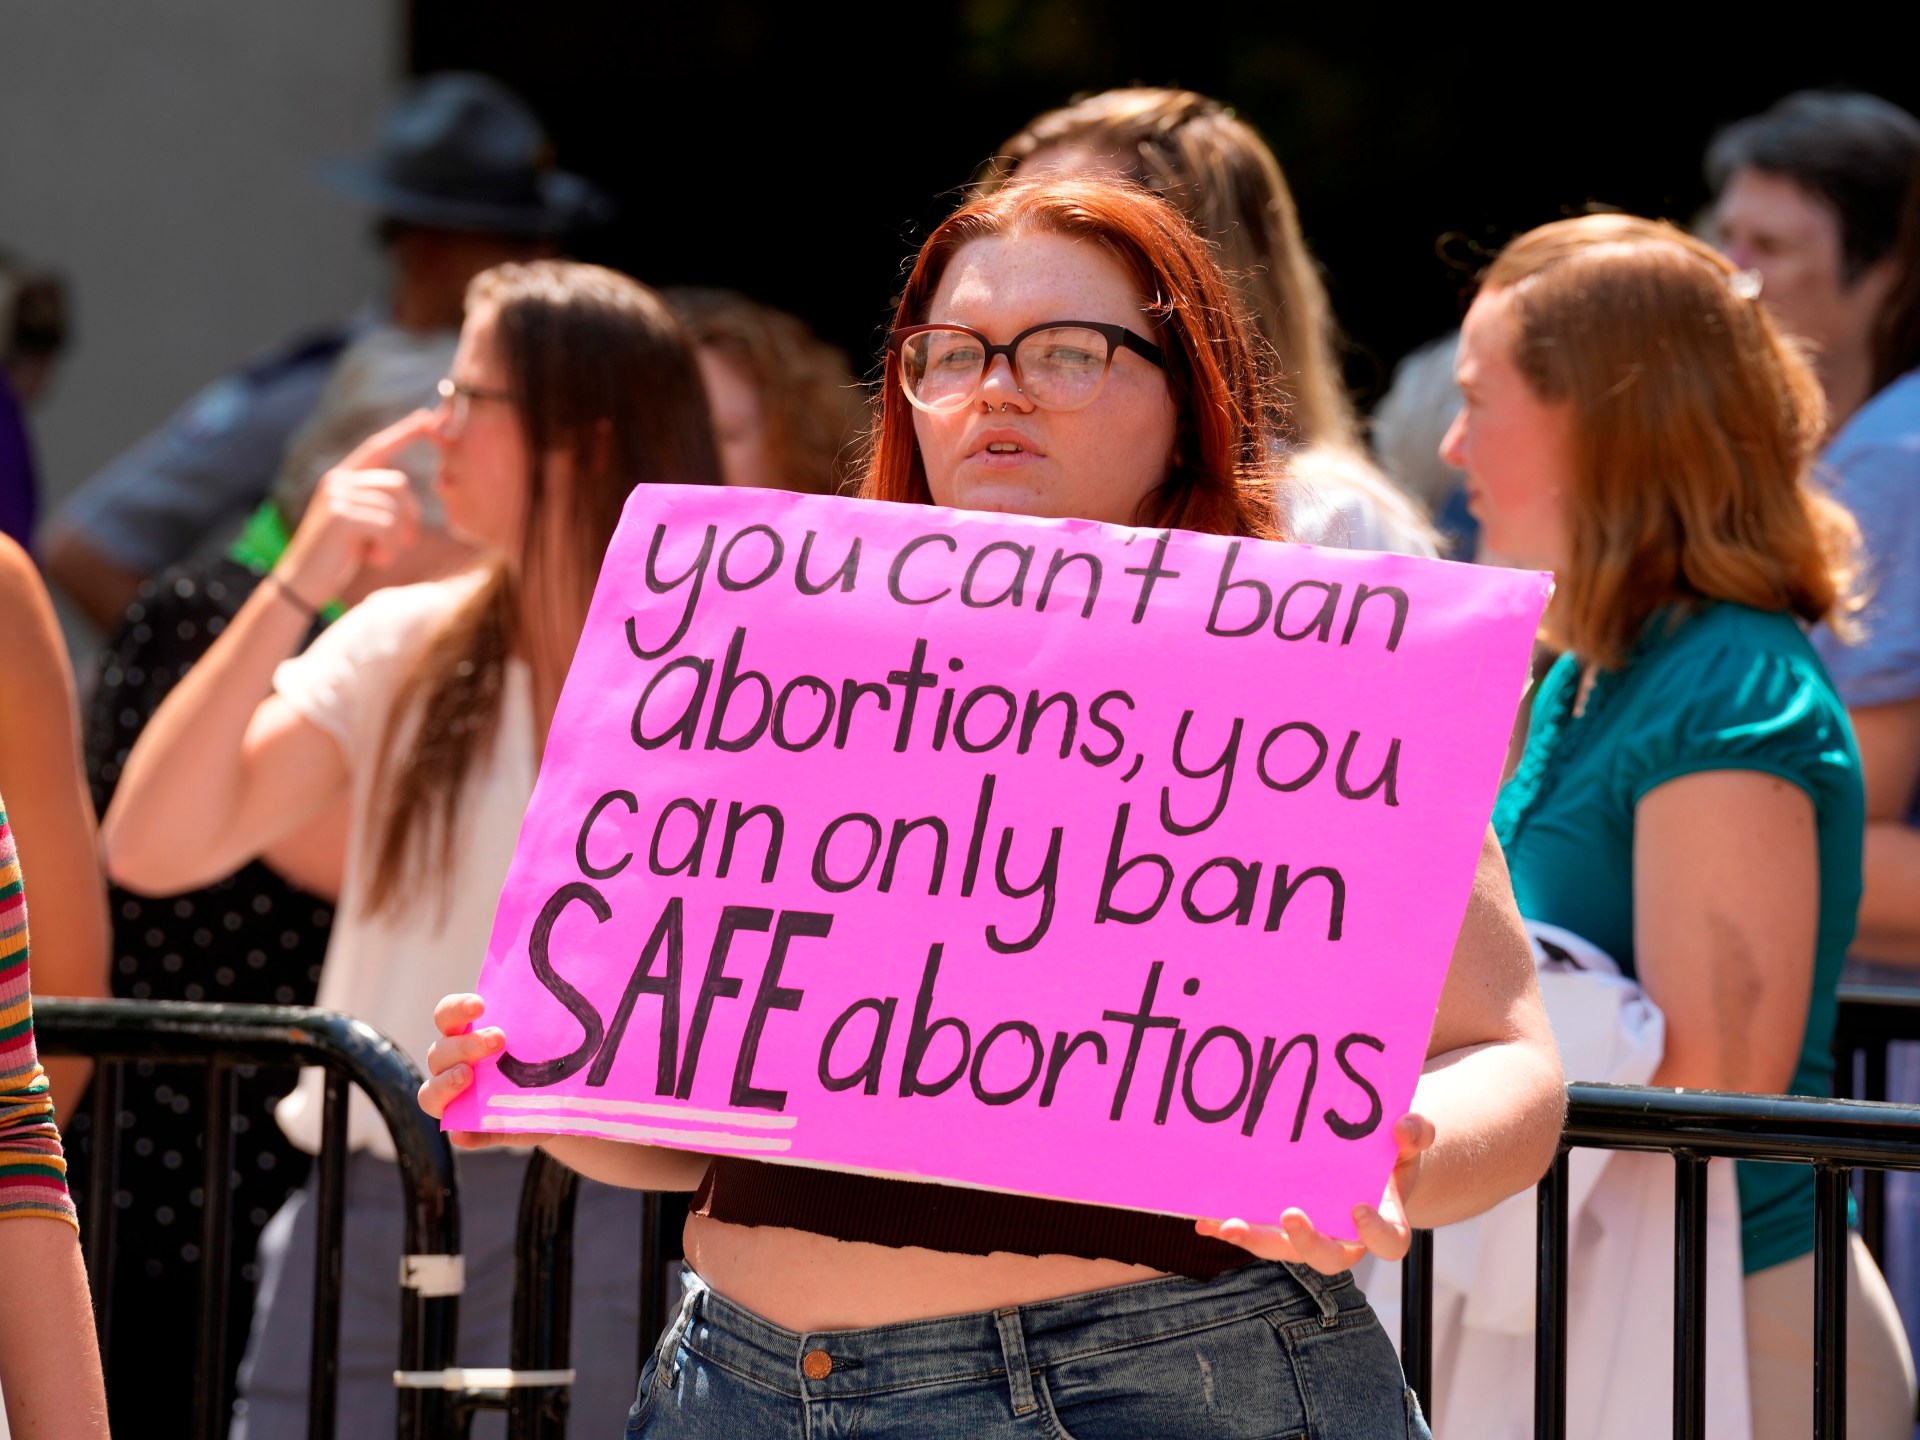 Texas Supreme Court halts order allowing emergency abortion | Women’s Rights News